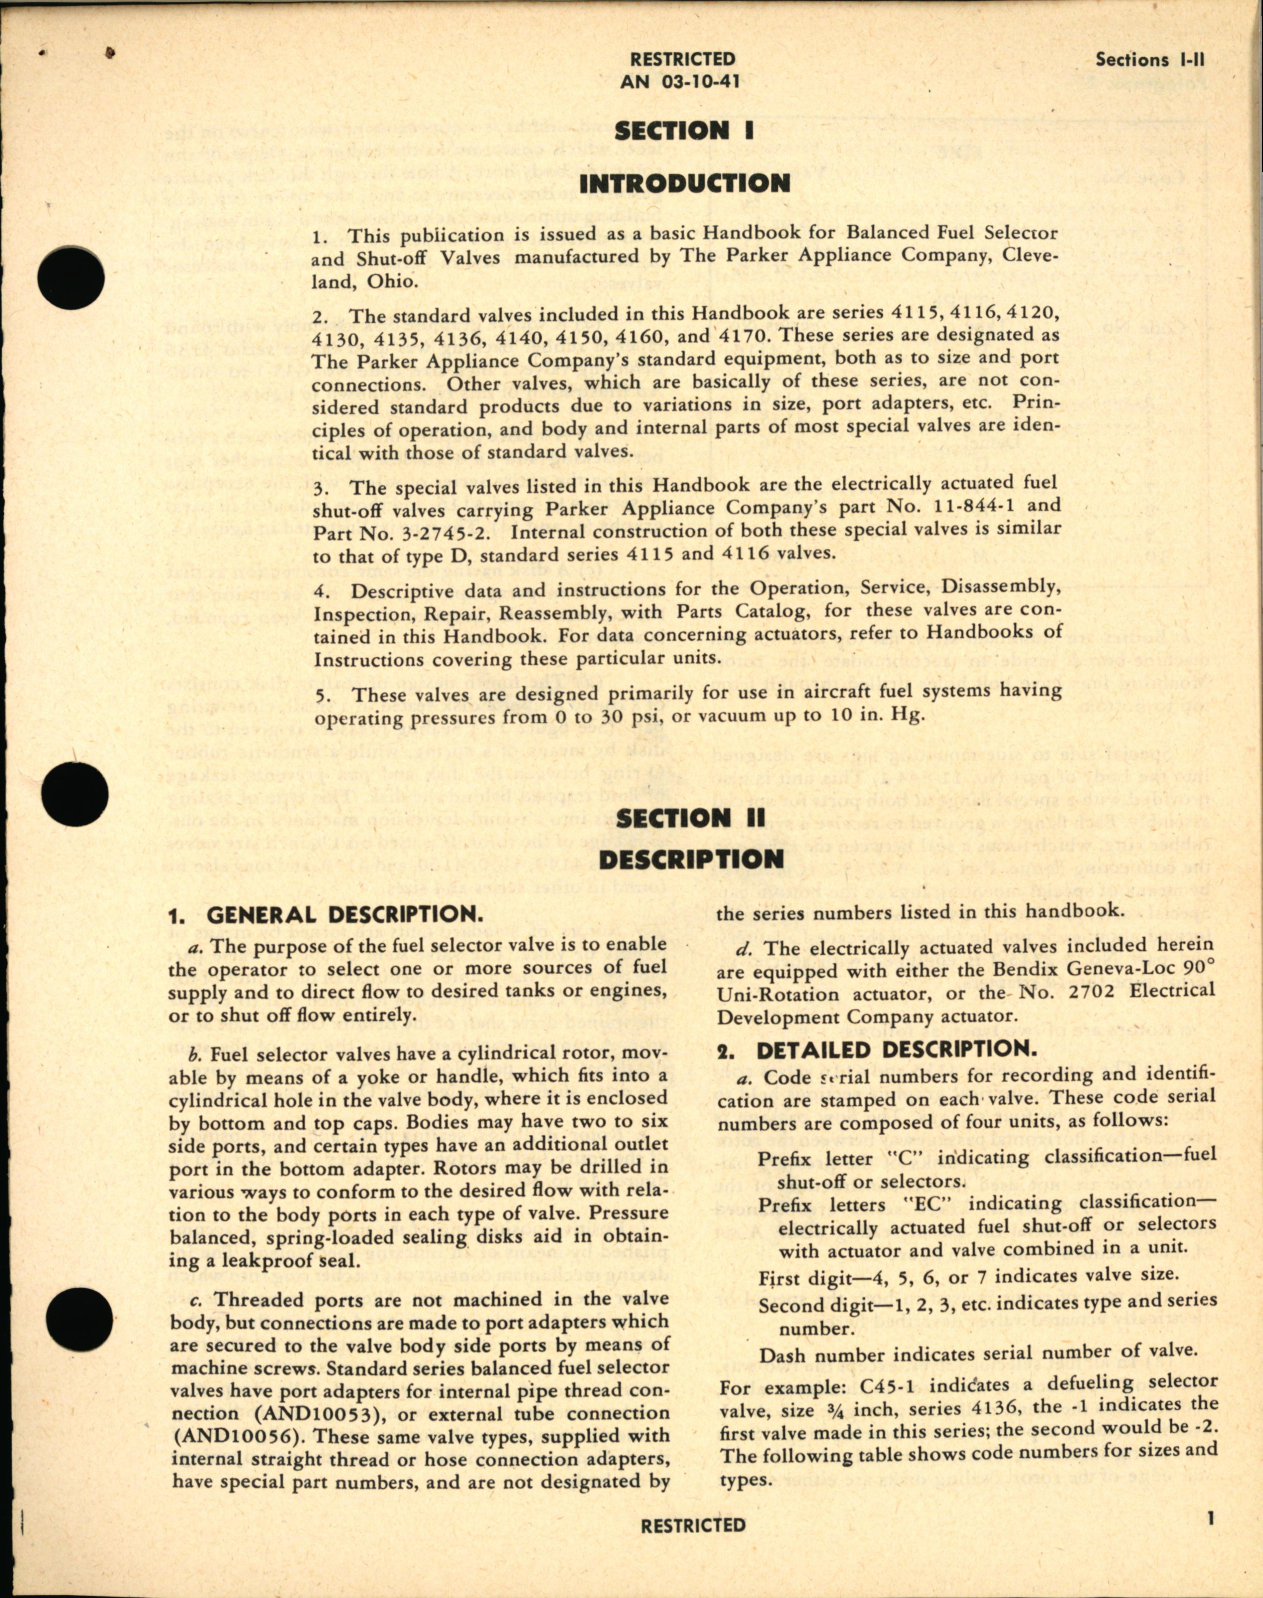 Sample page 7 from AirCorps Library document: Operation, Service, & Overhaul Instructions with Parts Catalog for Balanced Fuel Selector Valves